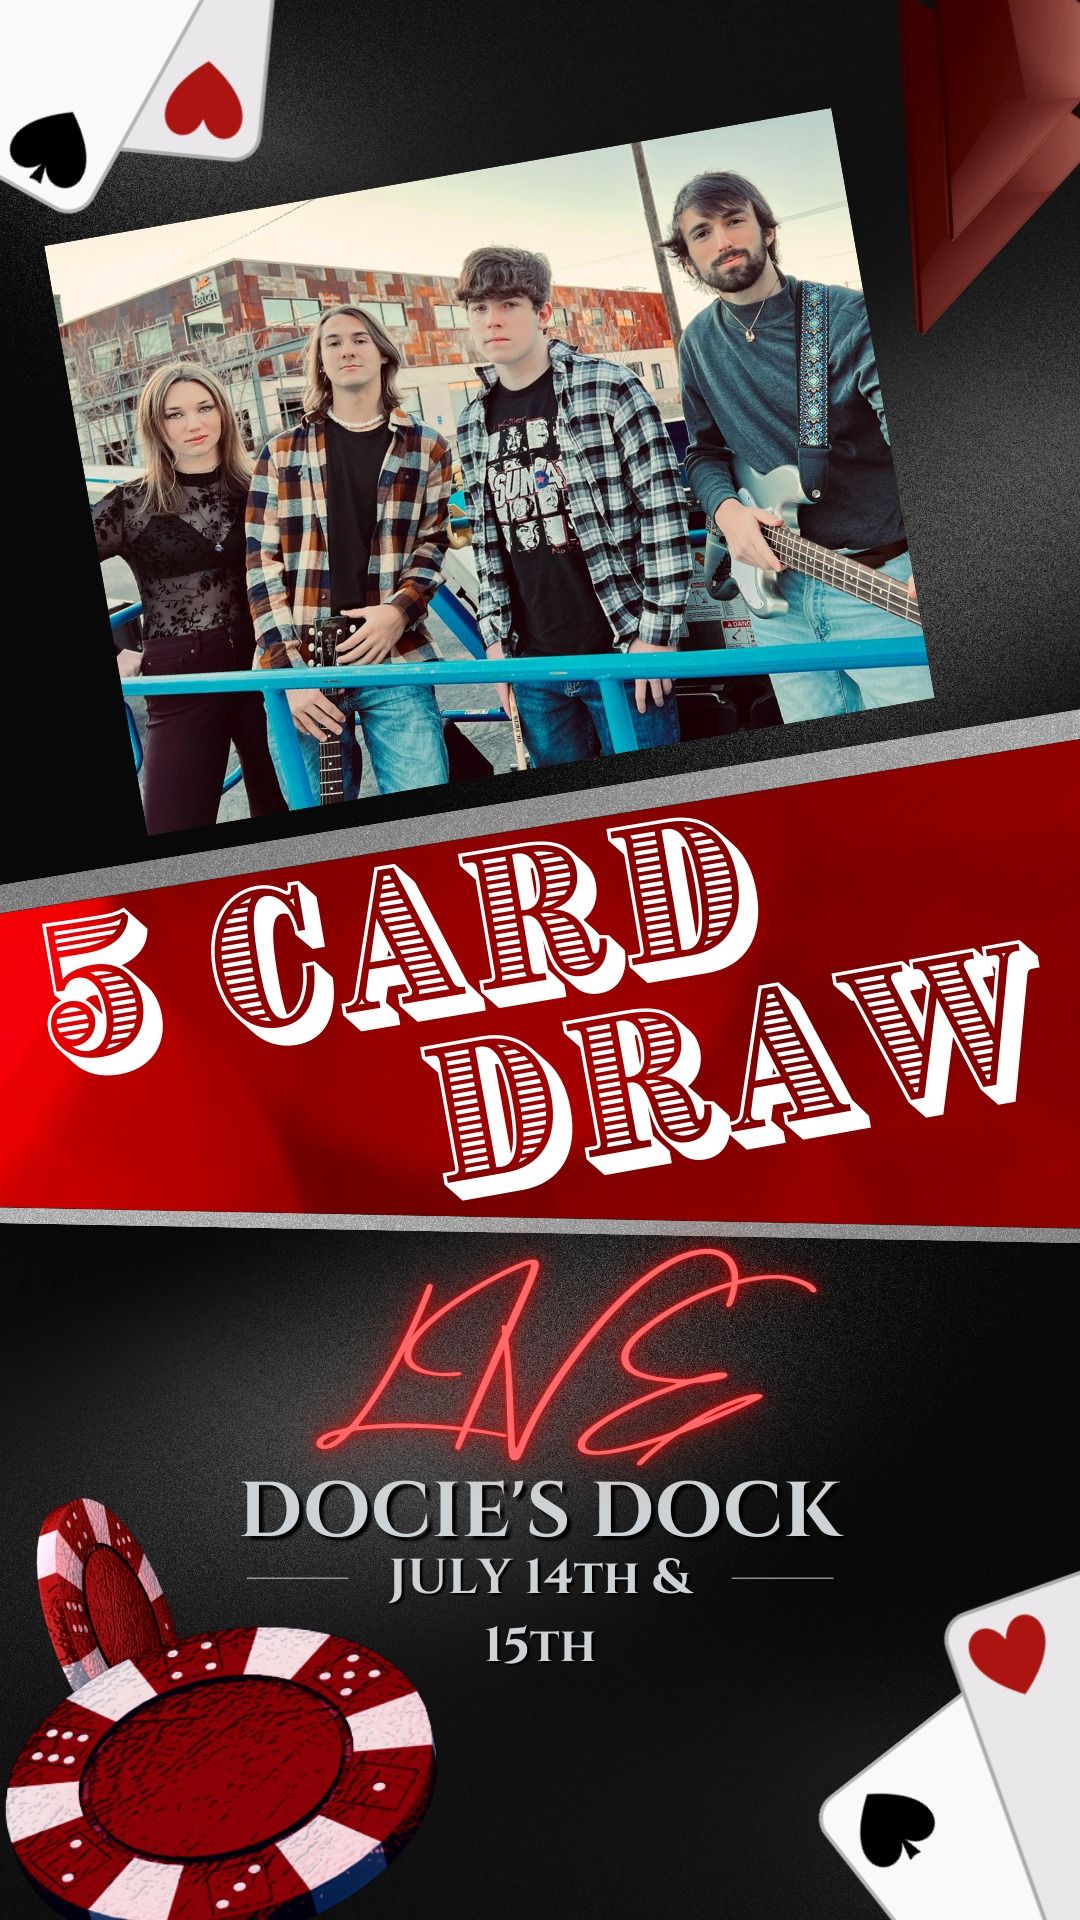 Five Card Draw Live @ Docie's Dock Two Nights Friday July 19th & Saturday July 20th--No Cover Charge